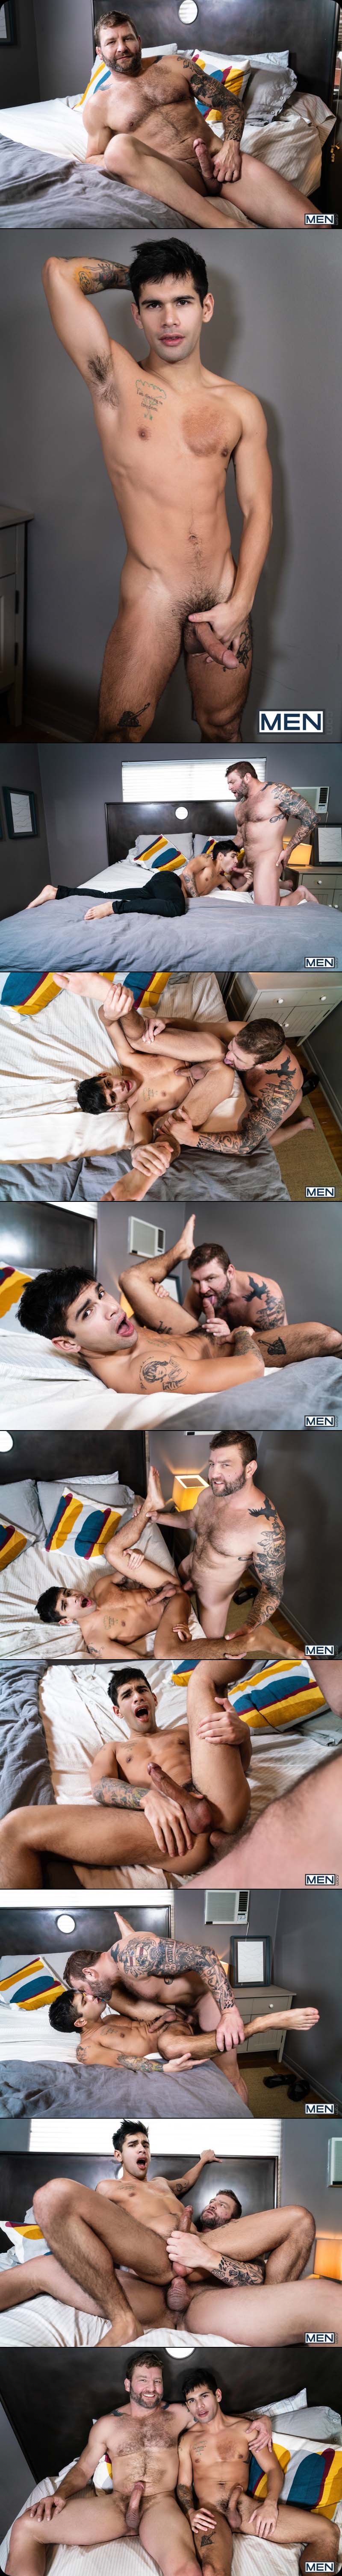 A DILF Will Do (Colby Jansen Fucks Ty Mitchell) at Str8 To Gay